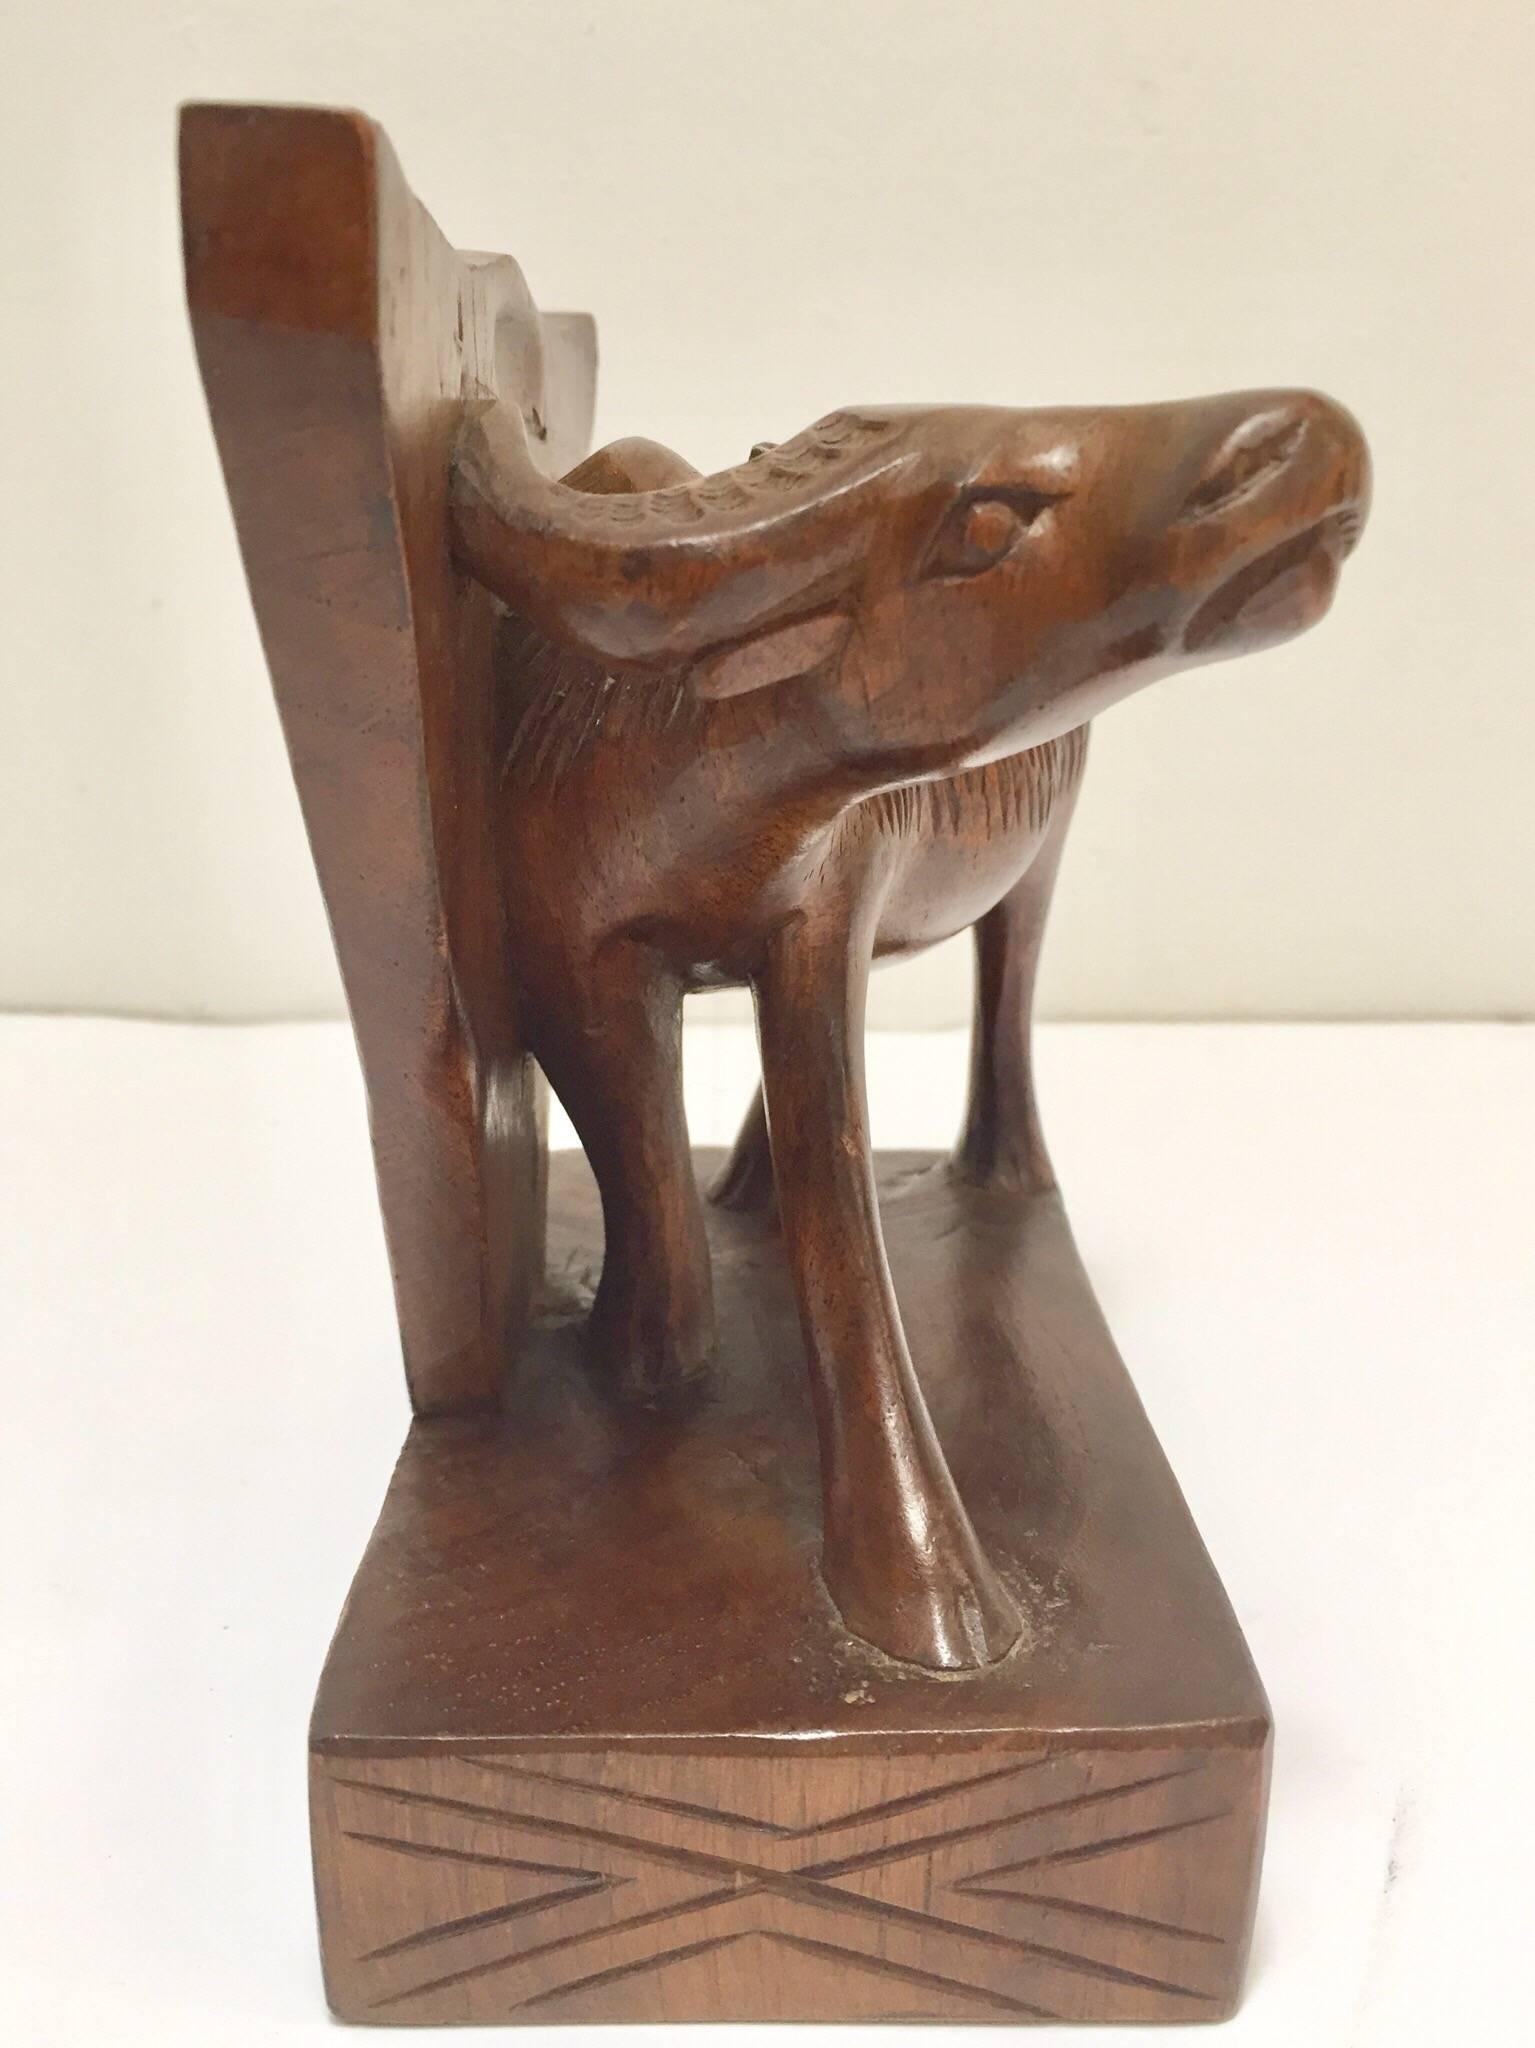 20th Century Hand-Carved Wooden Sculpture of African Buffalo Bookends